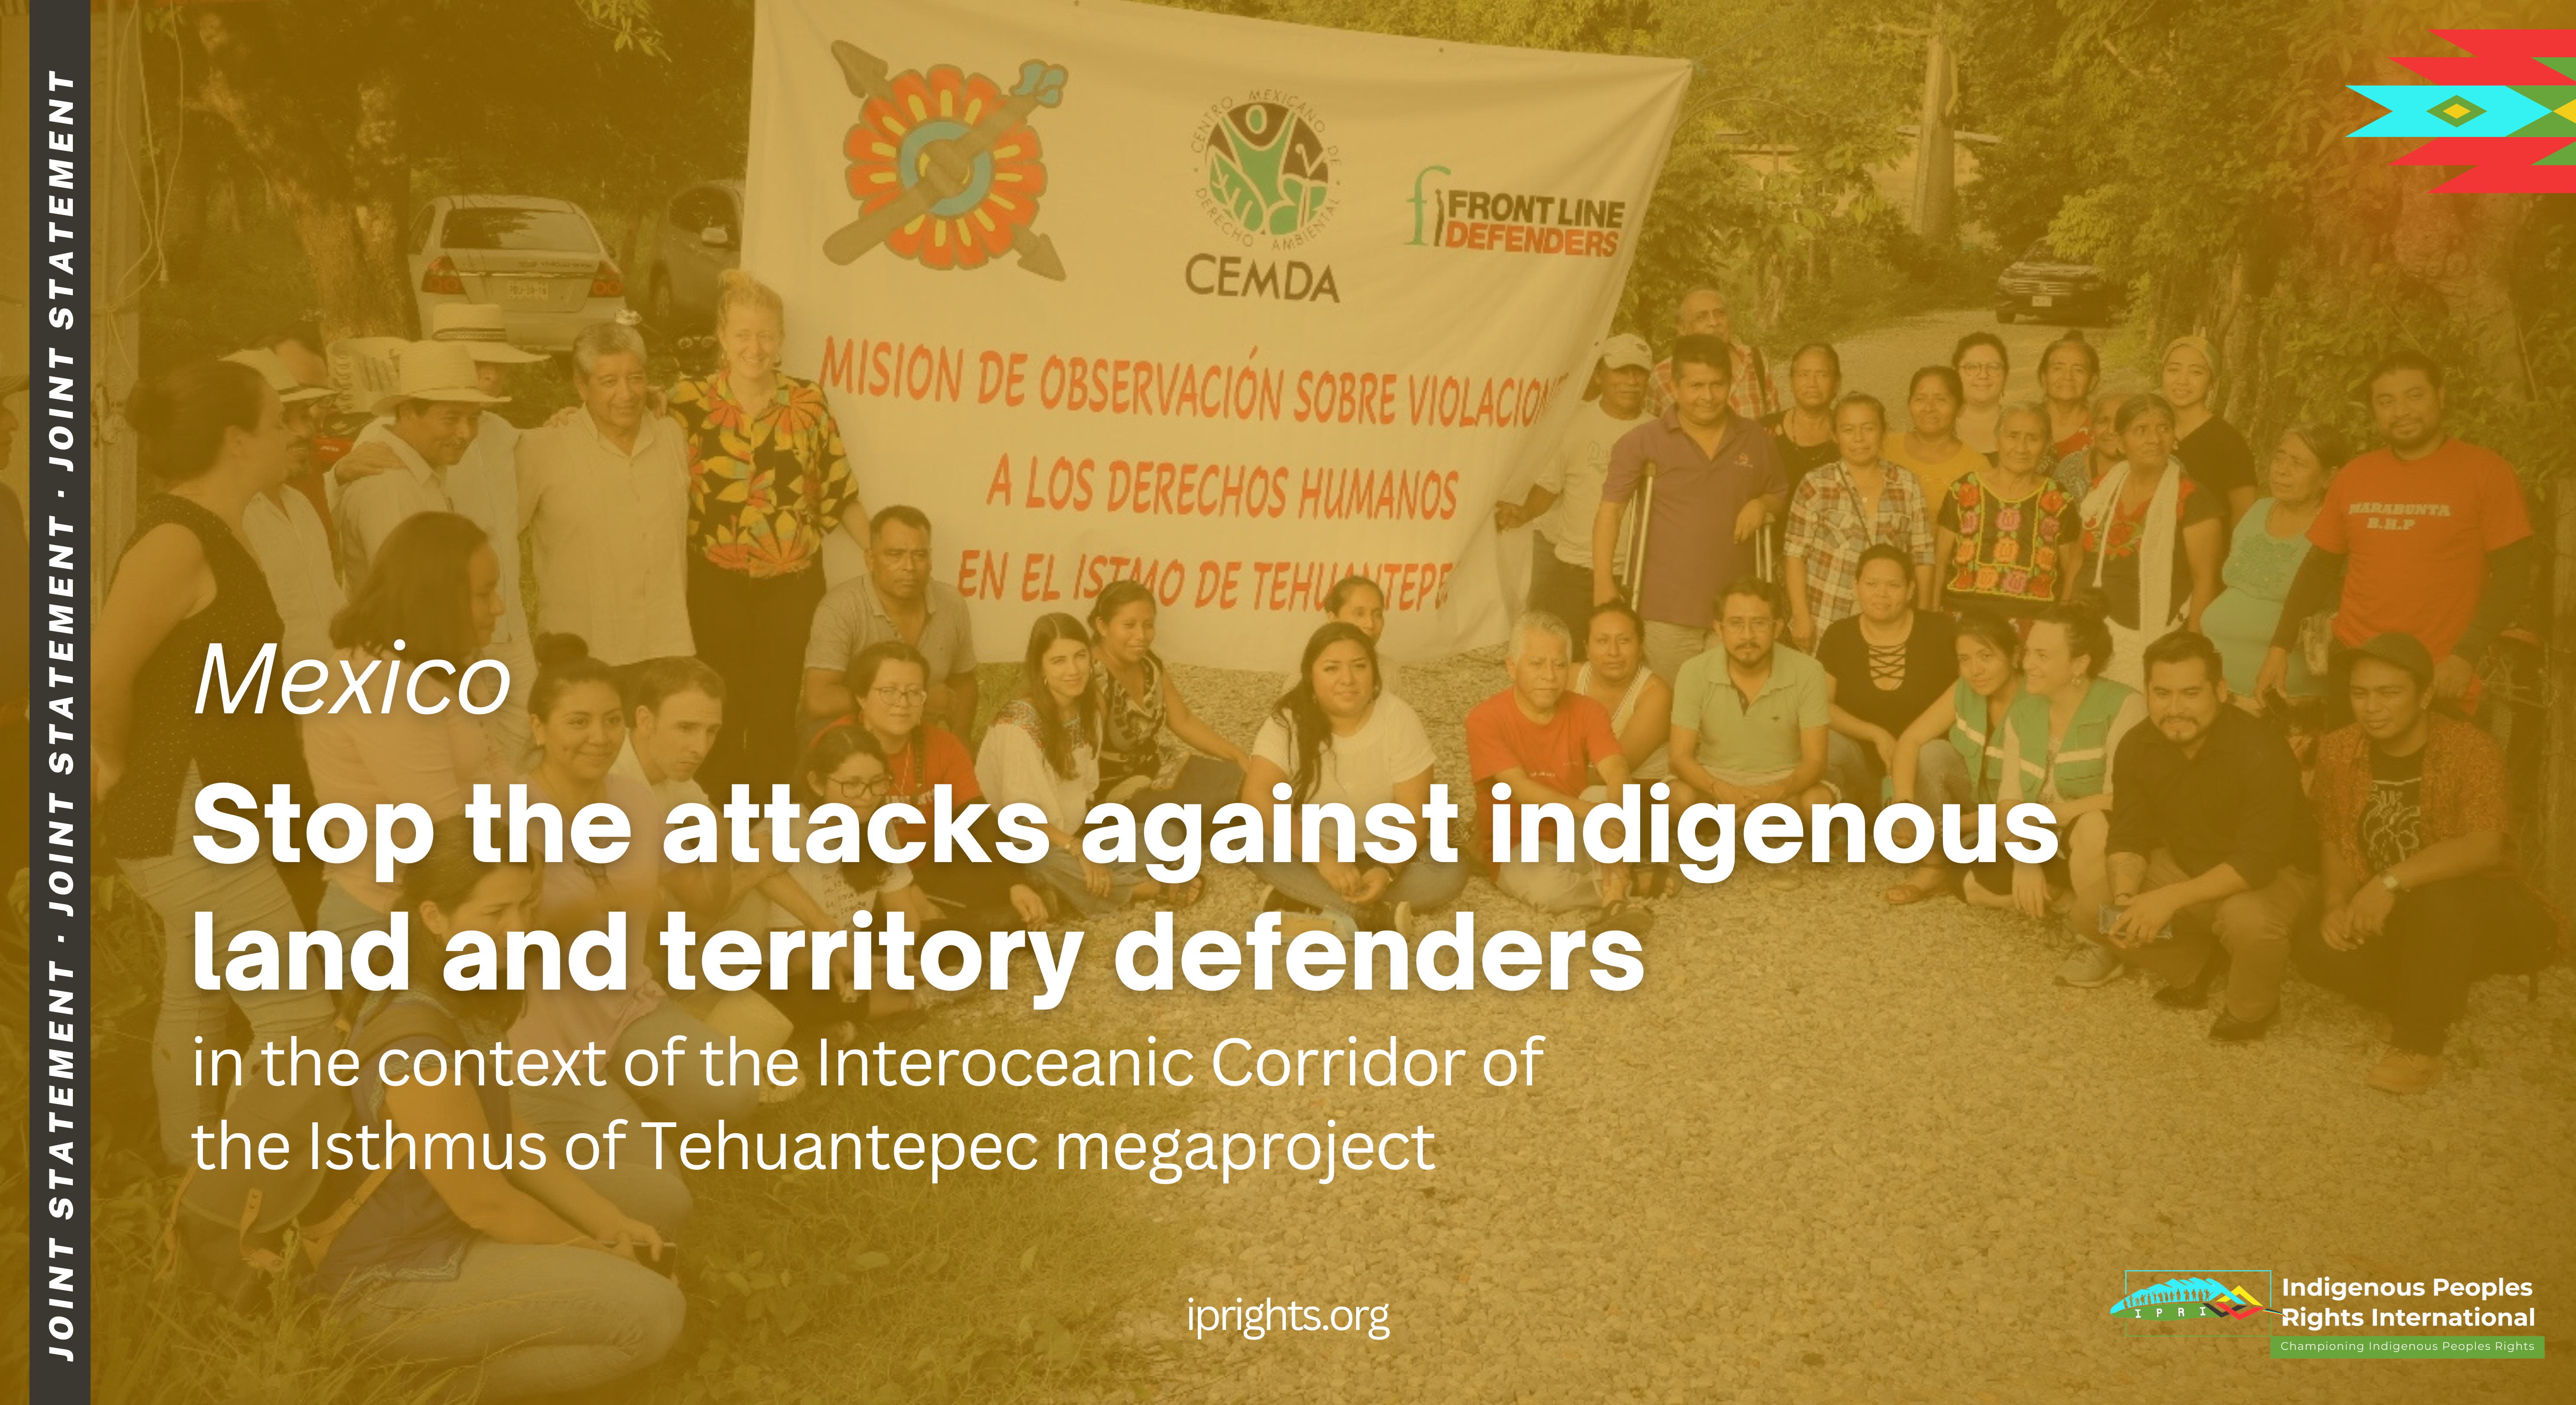 Stop the attacks against indigenous land and territory defenders in the context of the Interoceanic Corridor of the Isthmus of Tehuantepec megaproject